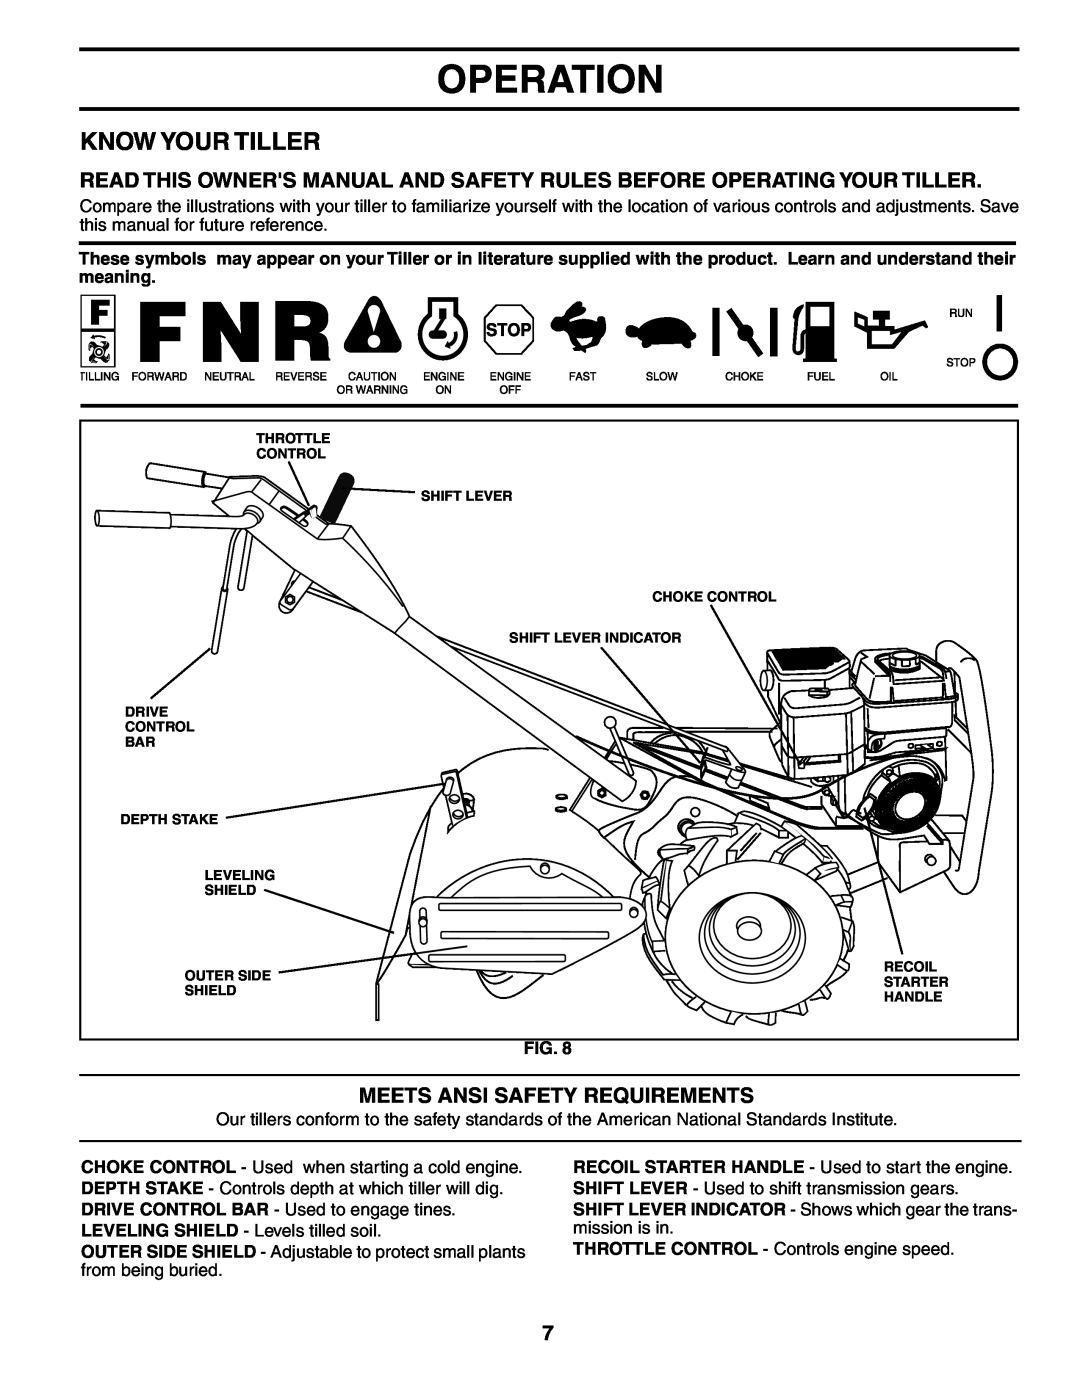 Poulan PRRT65B owner manual Operation, Know Your Tiller, Meets Ansi Safety Requirements 